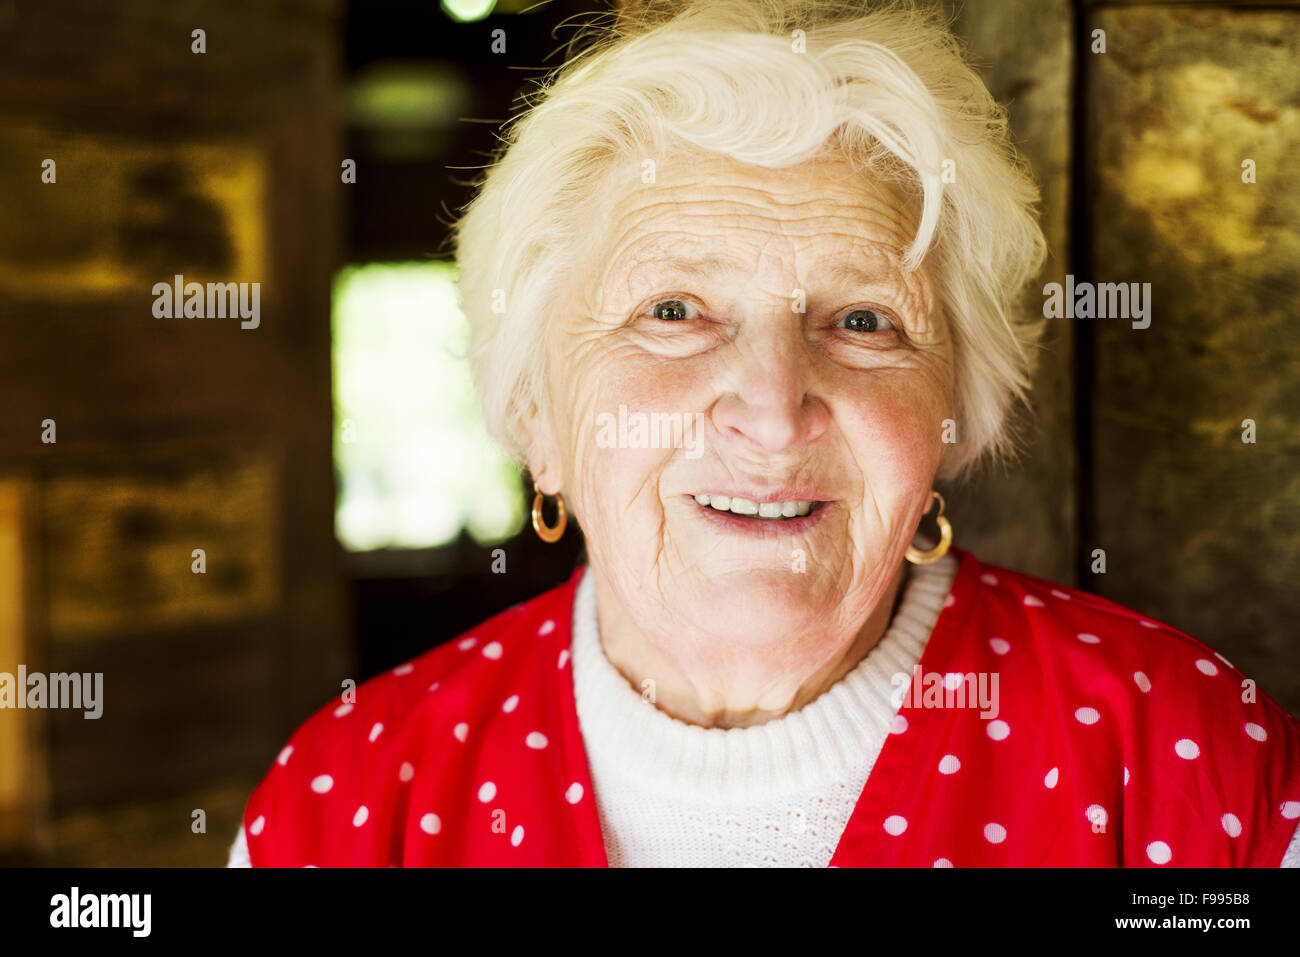 Portrait of smiling old woman at home Banque D'Images